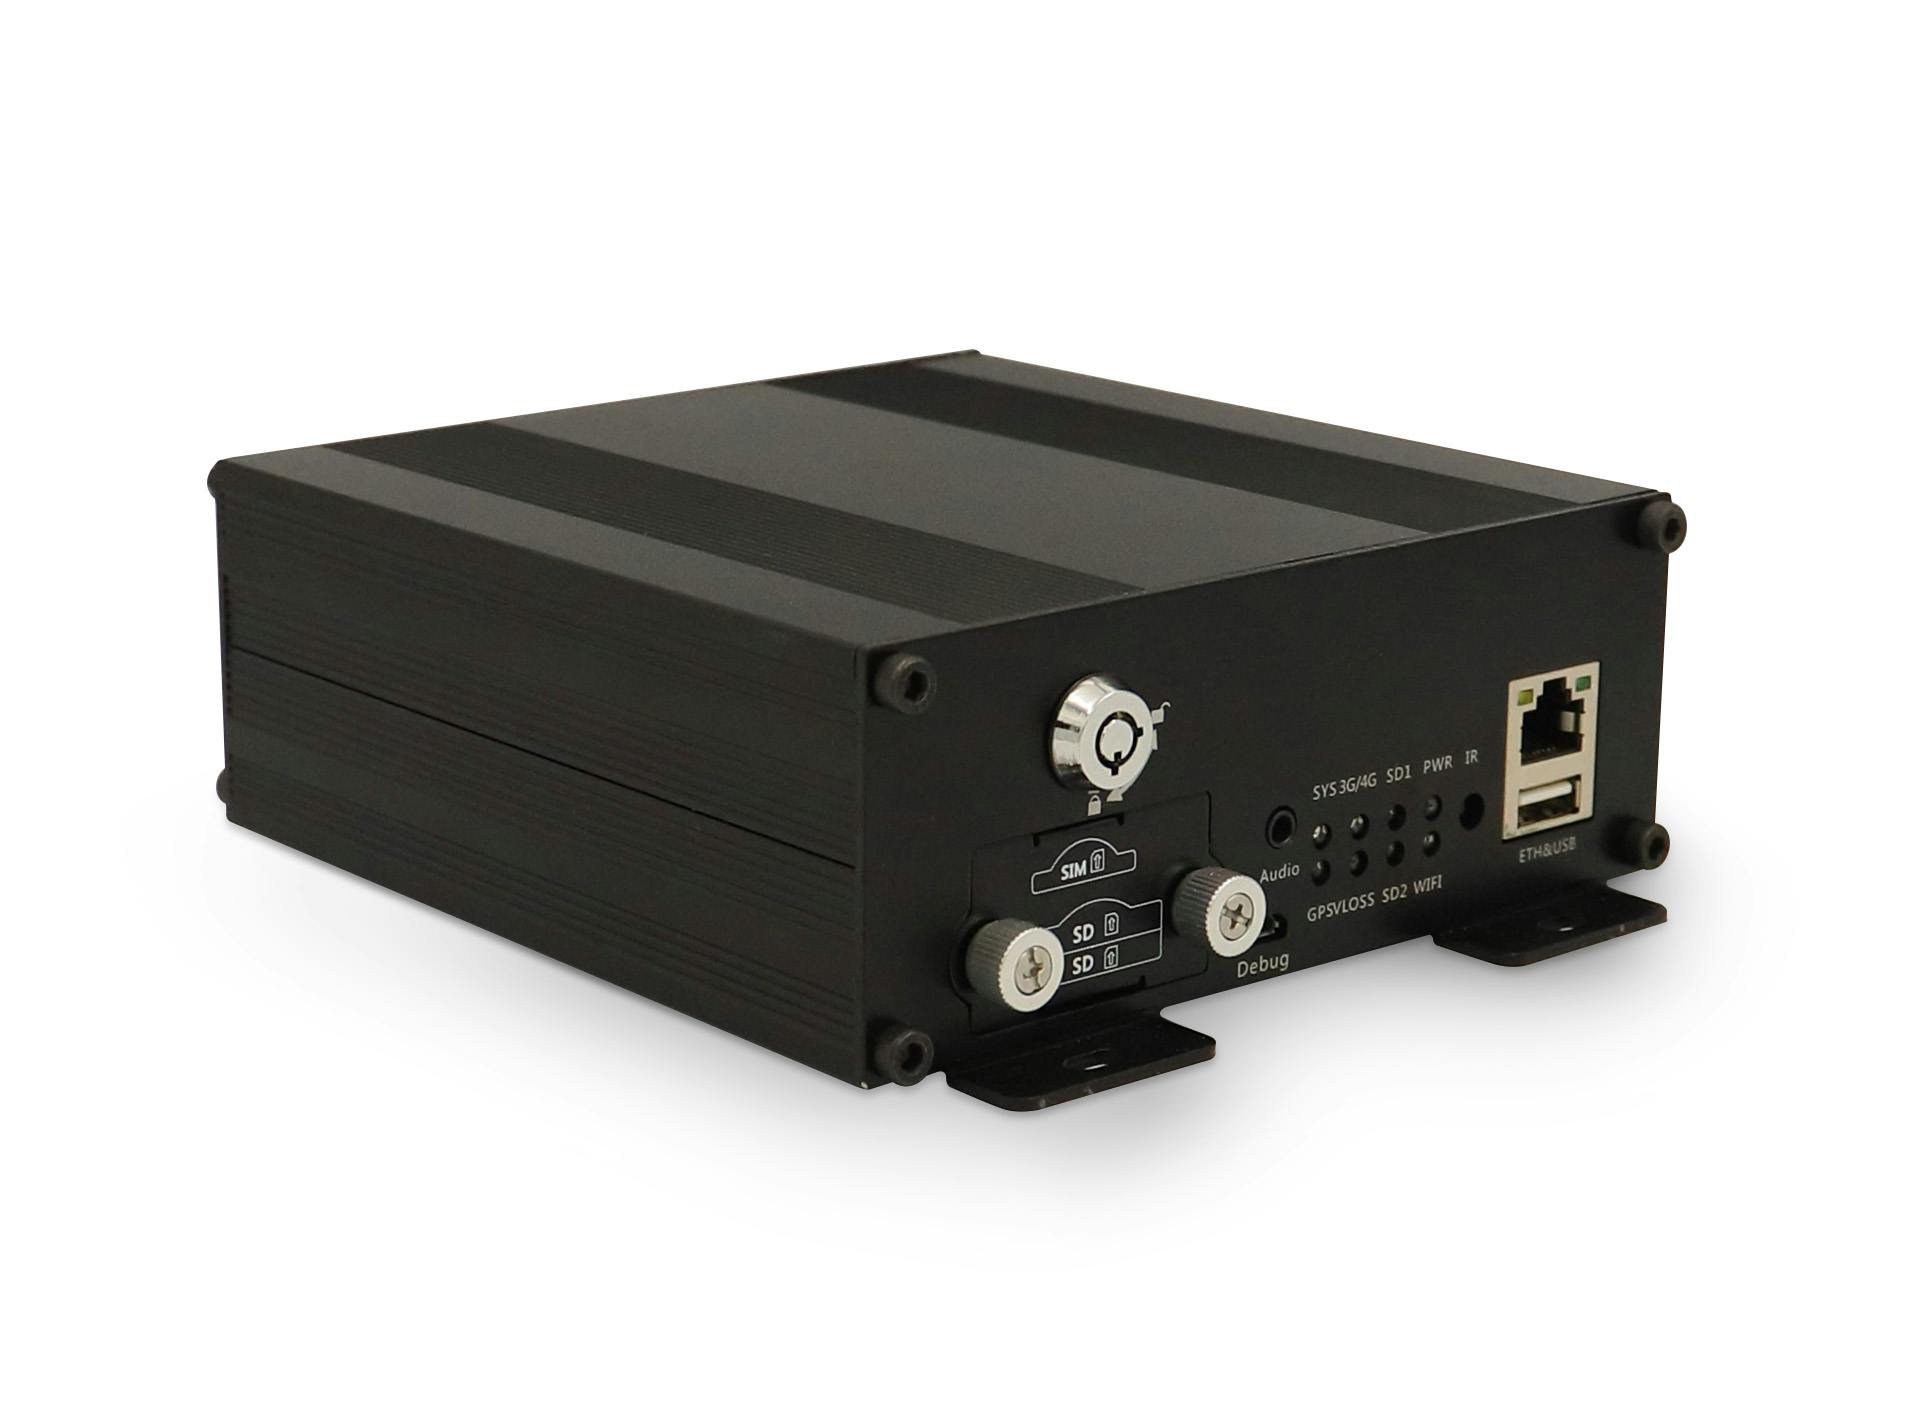 Meitrack MD822S is supported by GpsGate's fleet tracking platform